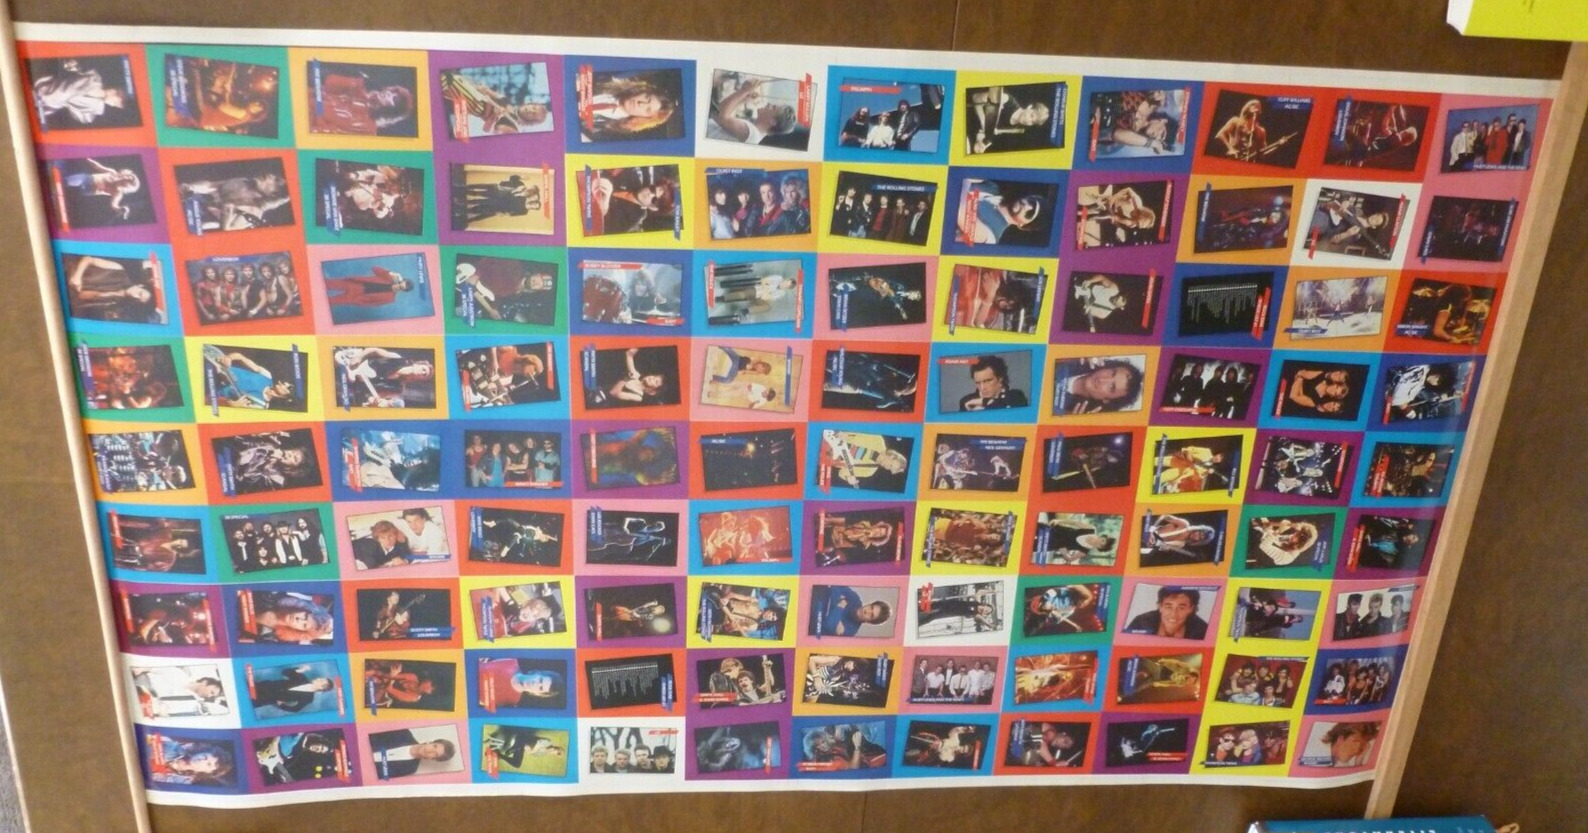 ROCK STAR Concert Cards 1985  UNCUT SHEET  108 card SET -  ACDC OZZY STONES WHAM